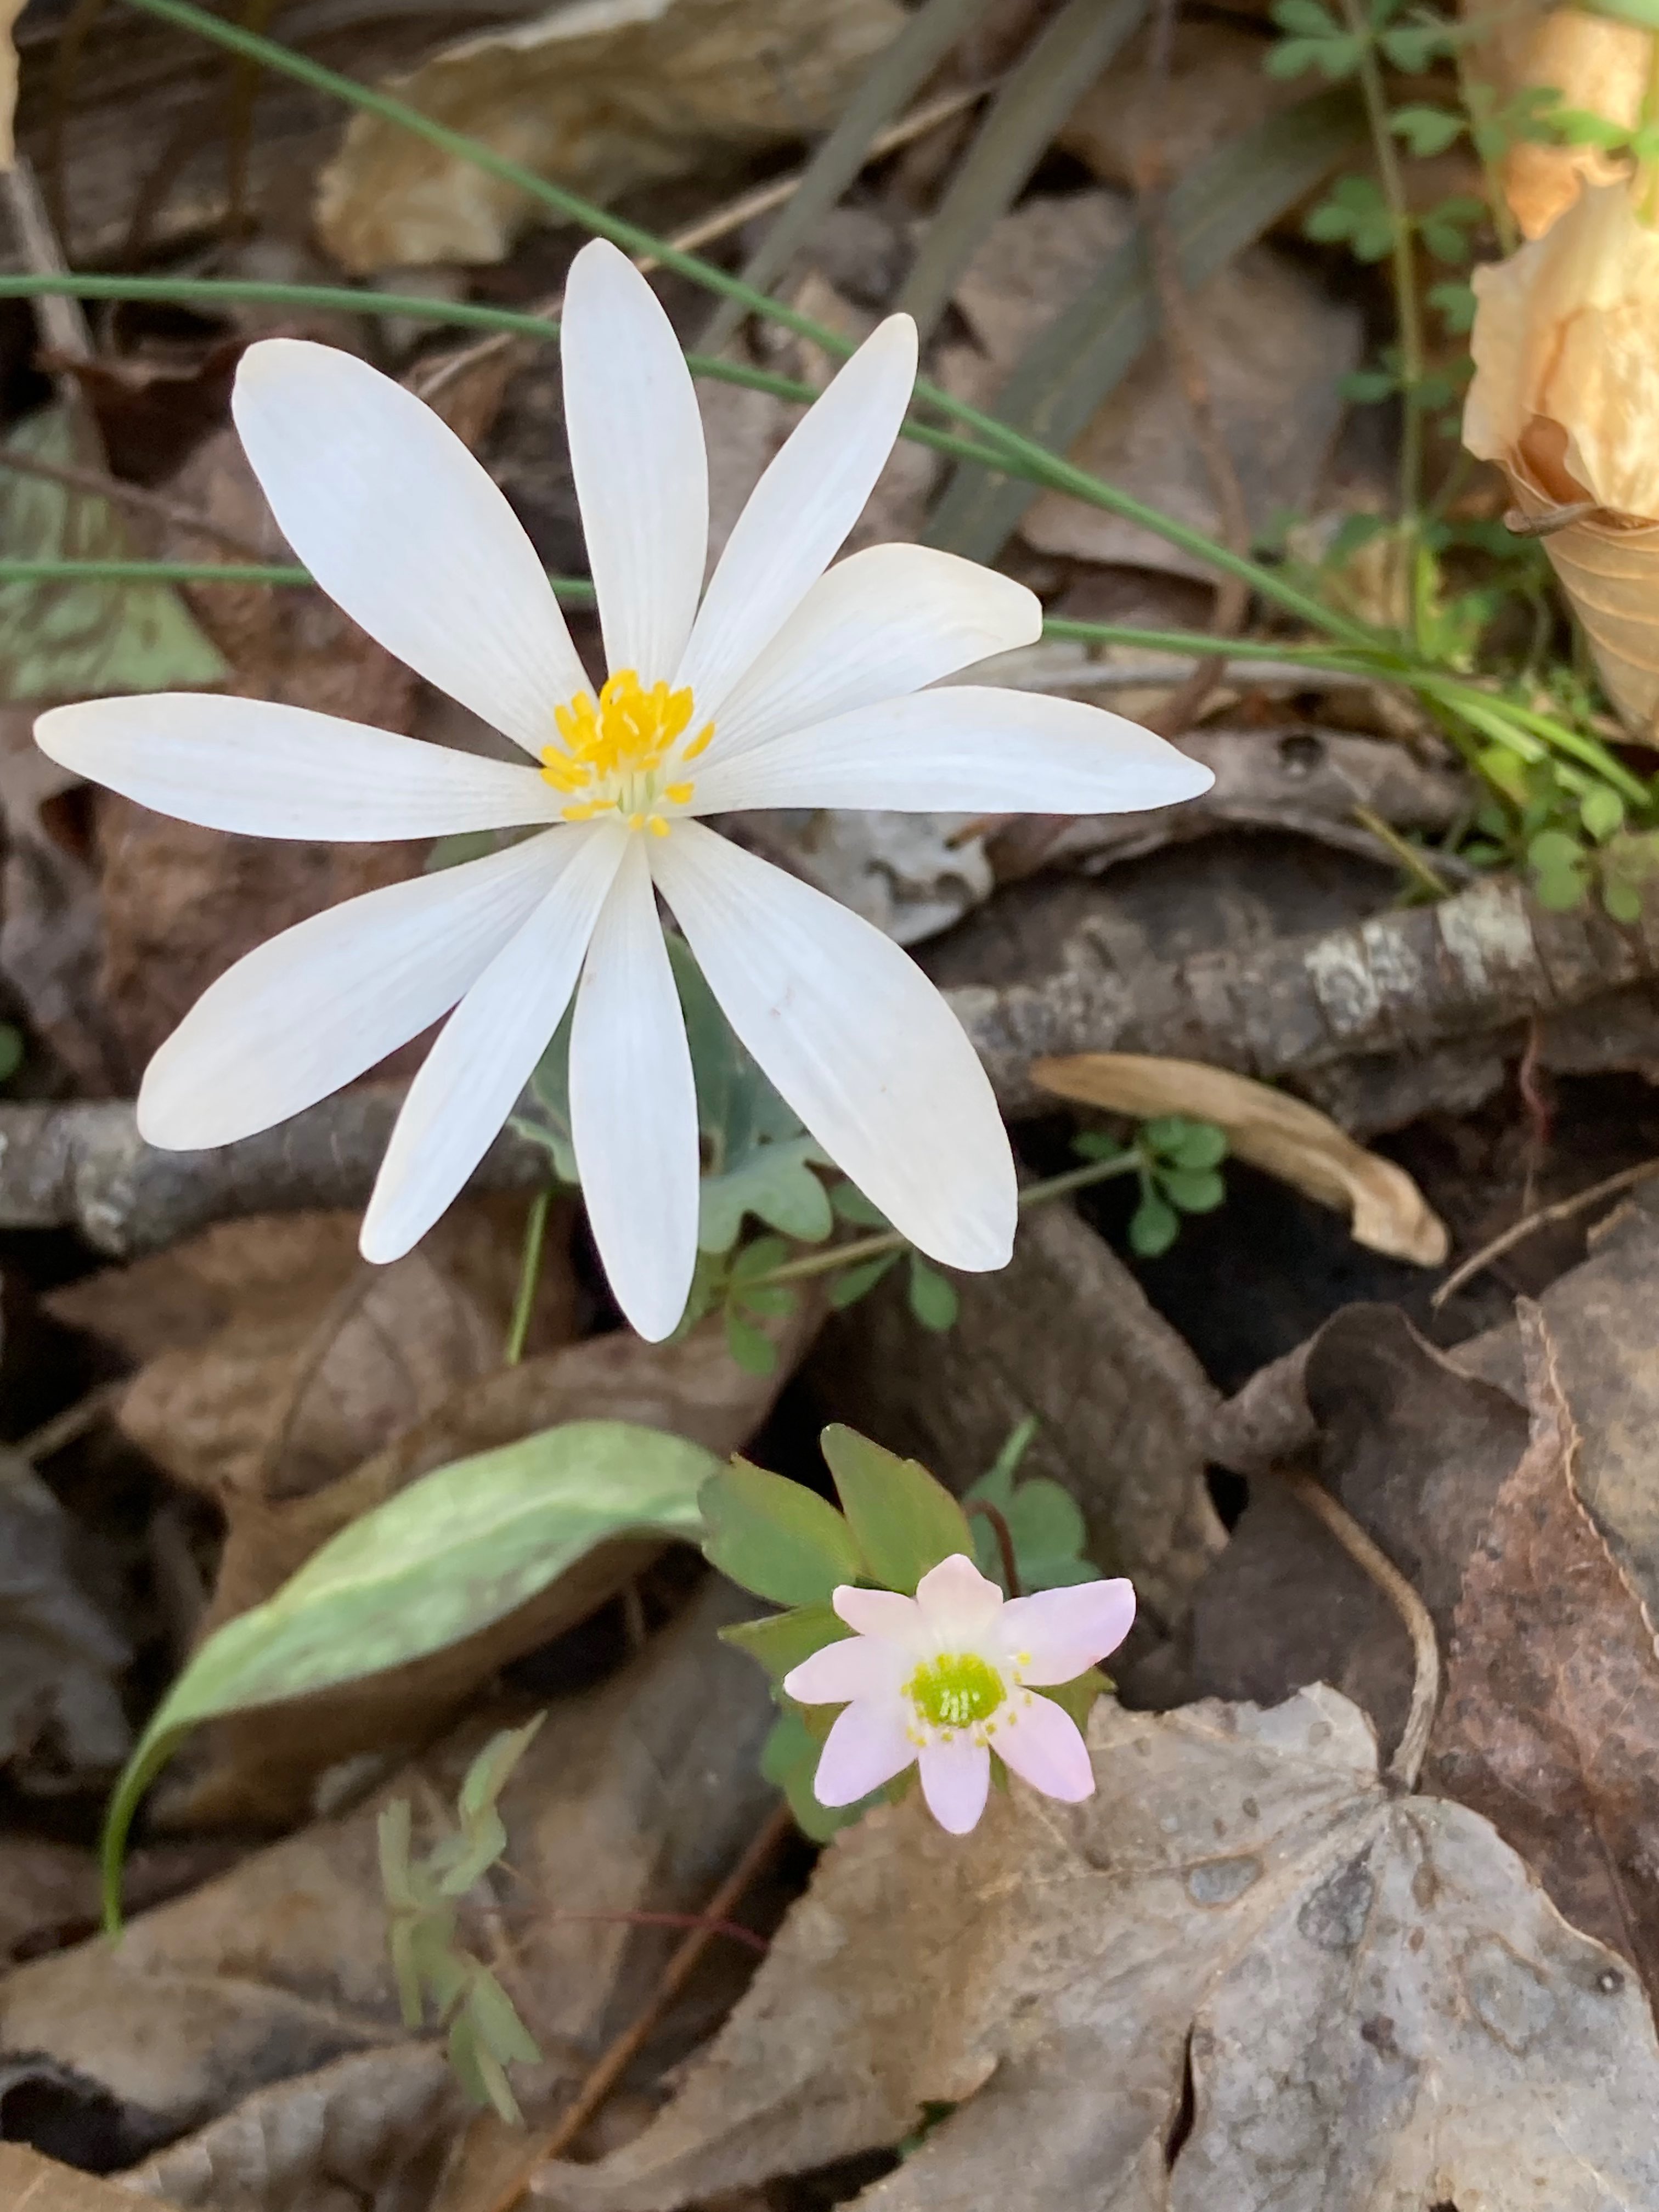 The Scientific Name is Sanguinaria canadensis. You will likely hear them called Bloodroot, Red Puccoon. This picture shows the 